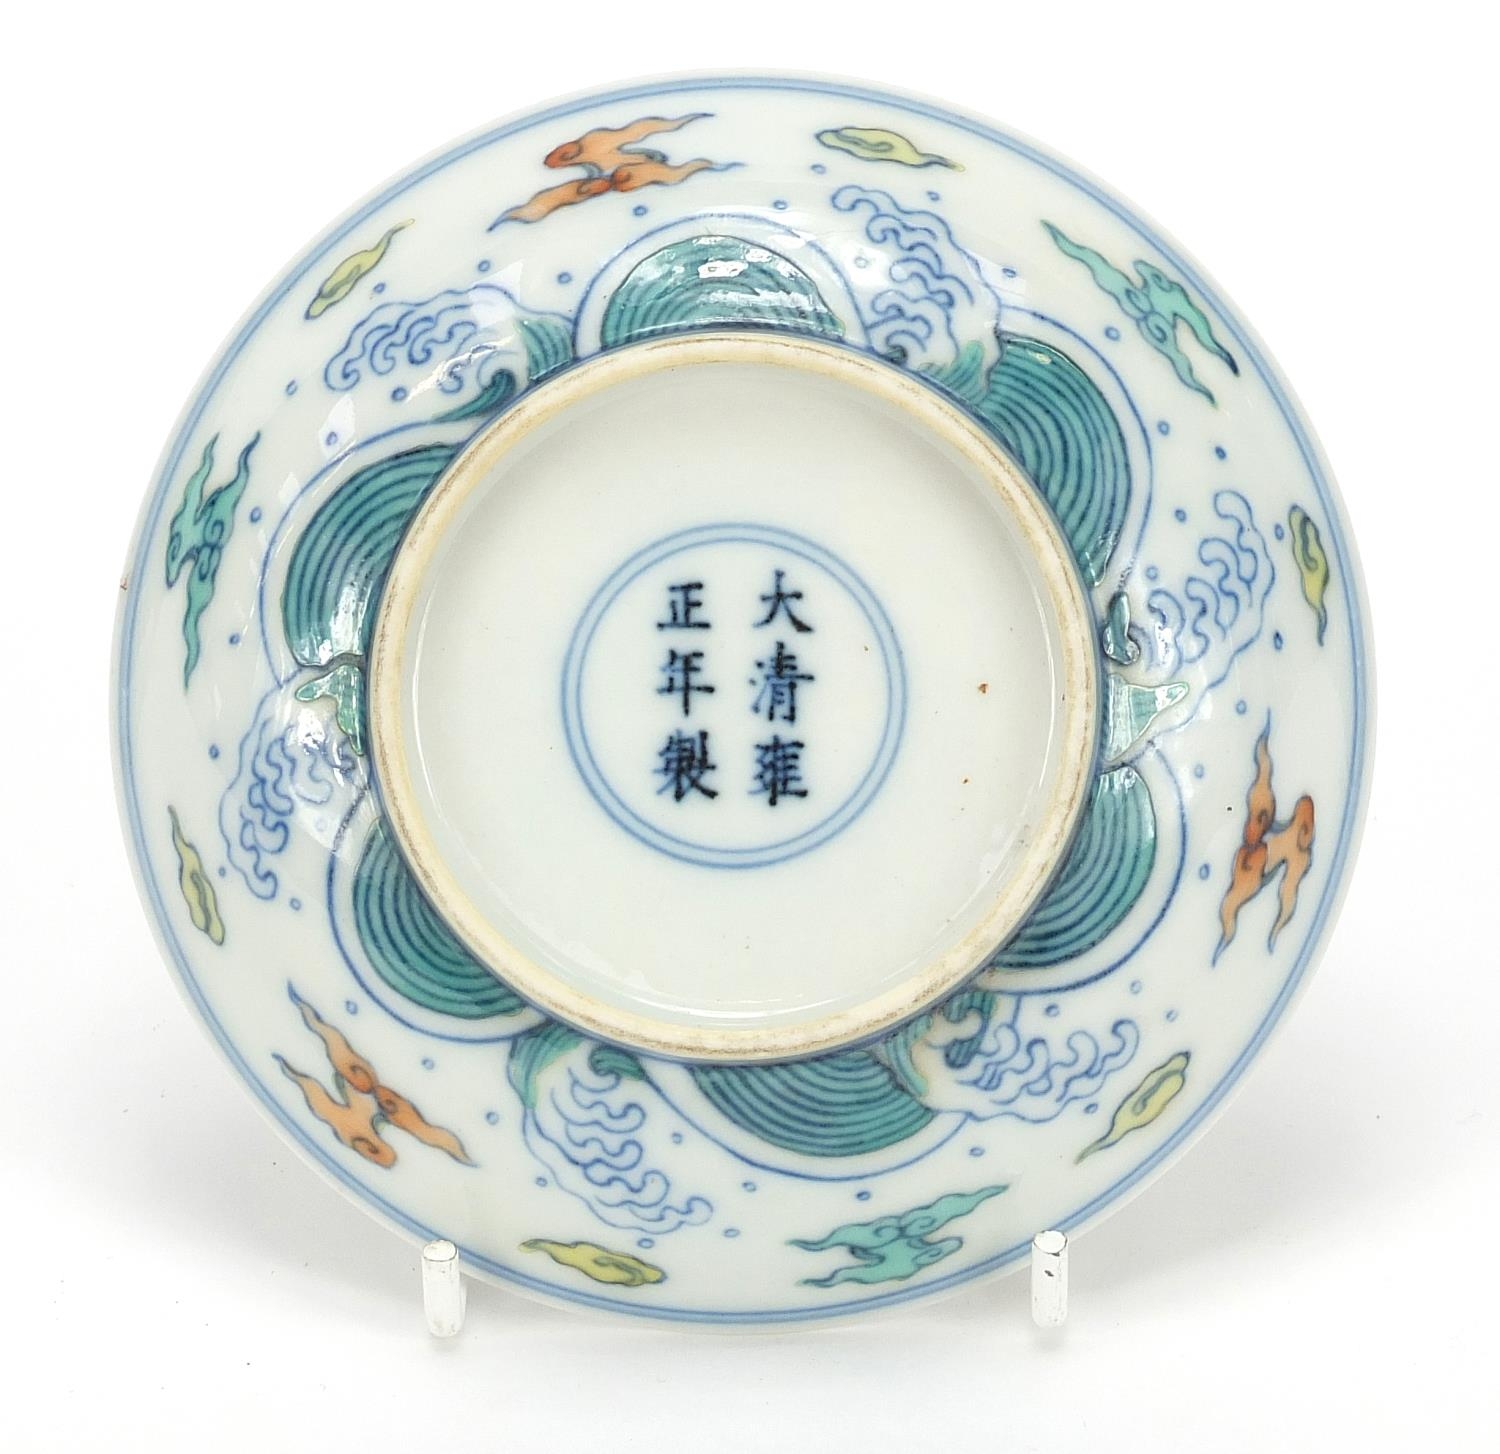 Chinese doucai porcelain dish hand painted with a dragon amongst clouds, six figure character - Image 2 of 4